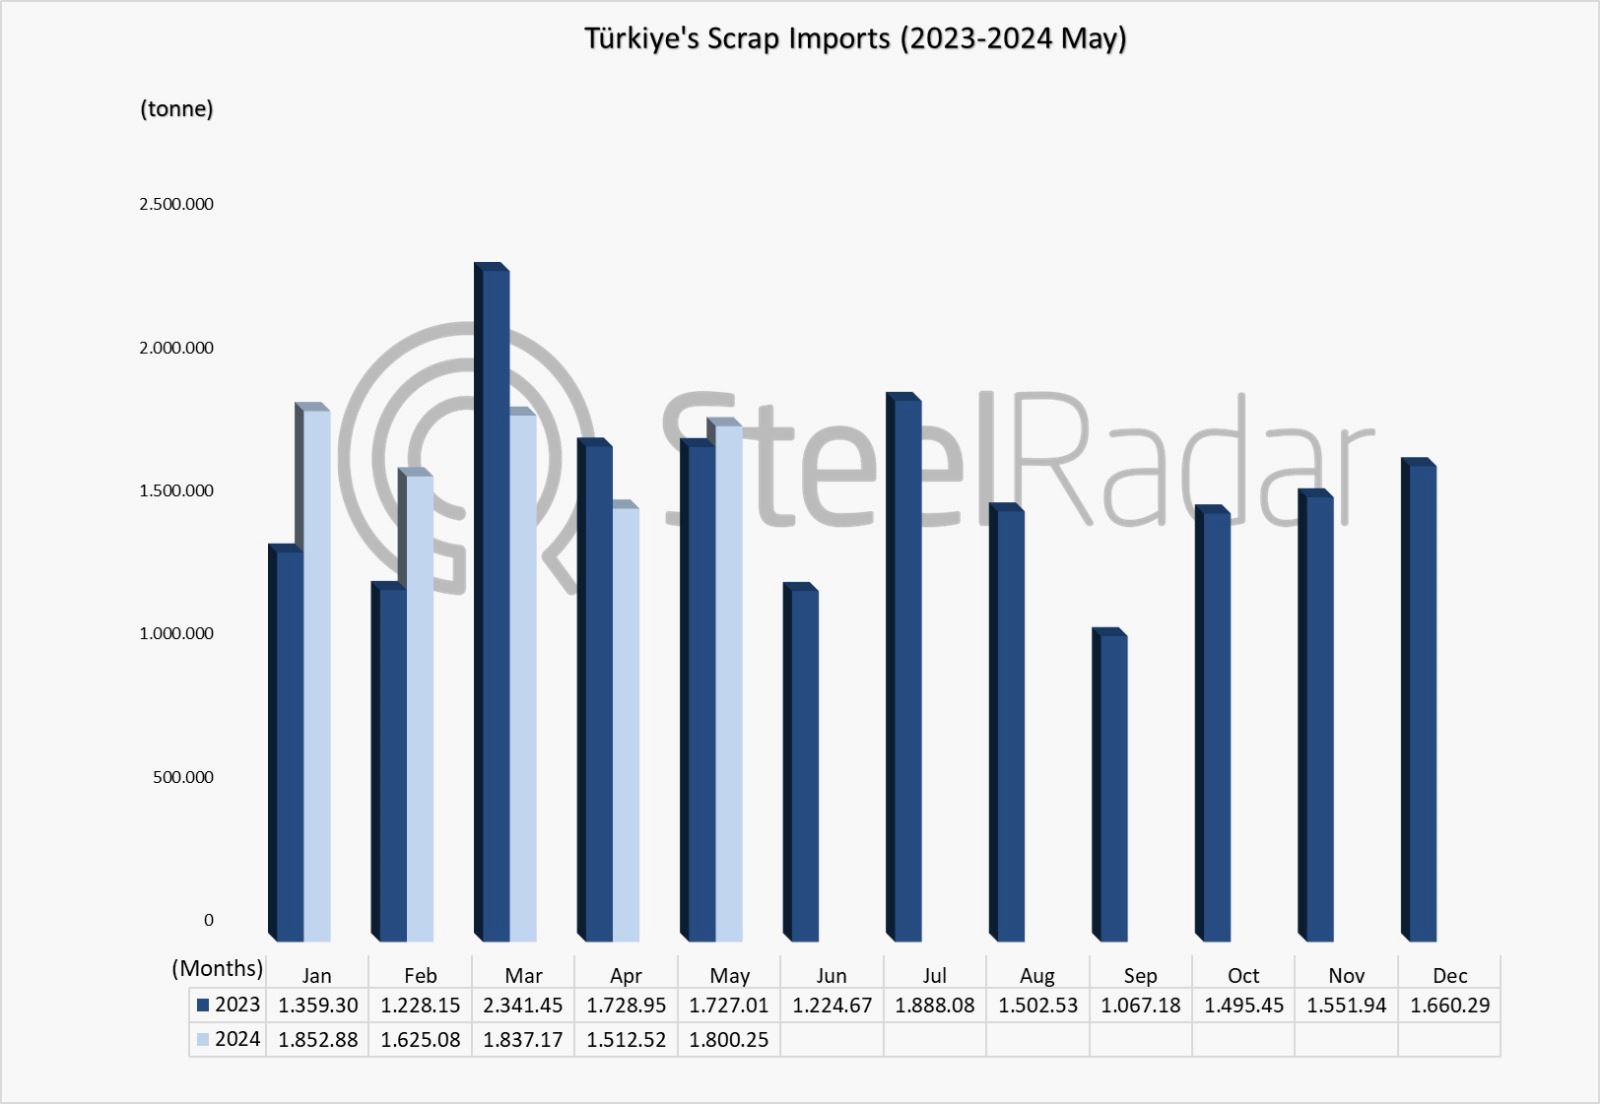 Türkiye's scrap imports increased by 2.9% in the January-May period